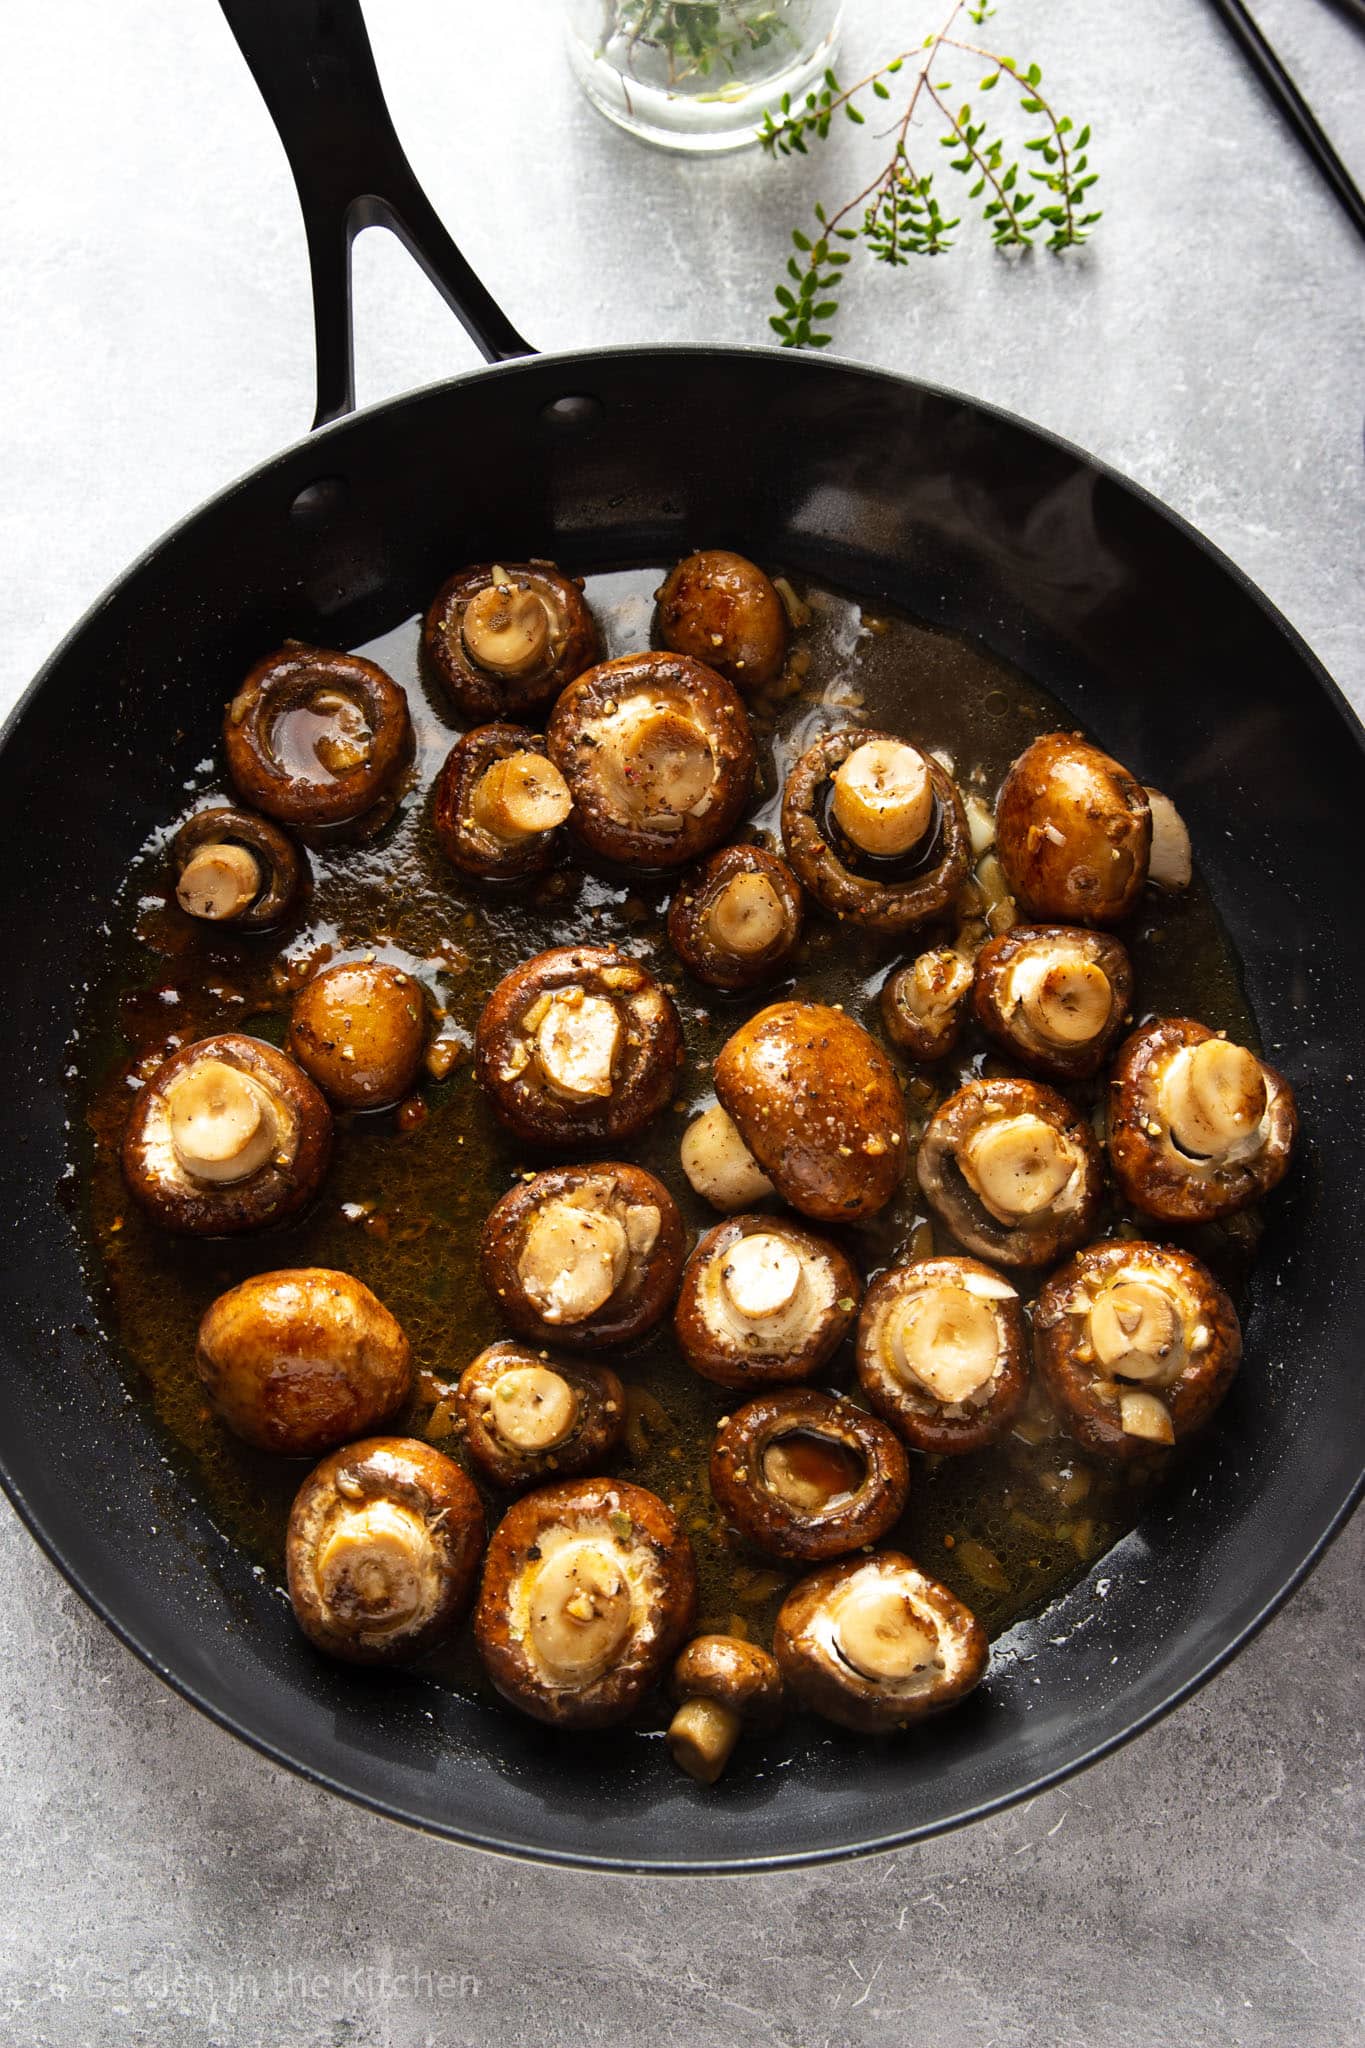 Mushrooms cooked a a black skillet. Image shows that mushrooms release water and therefore additional liquid is not needed. 